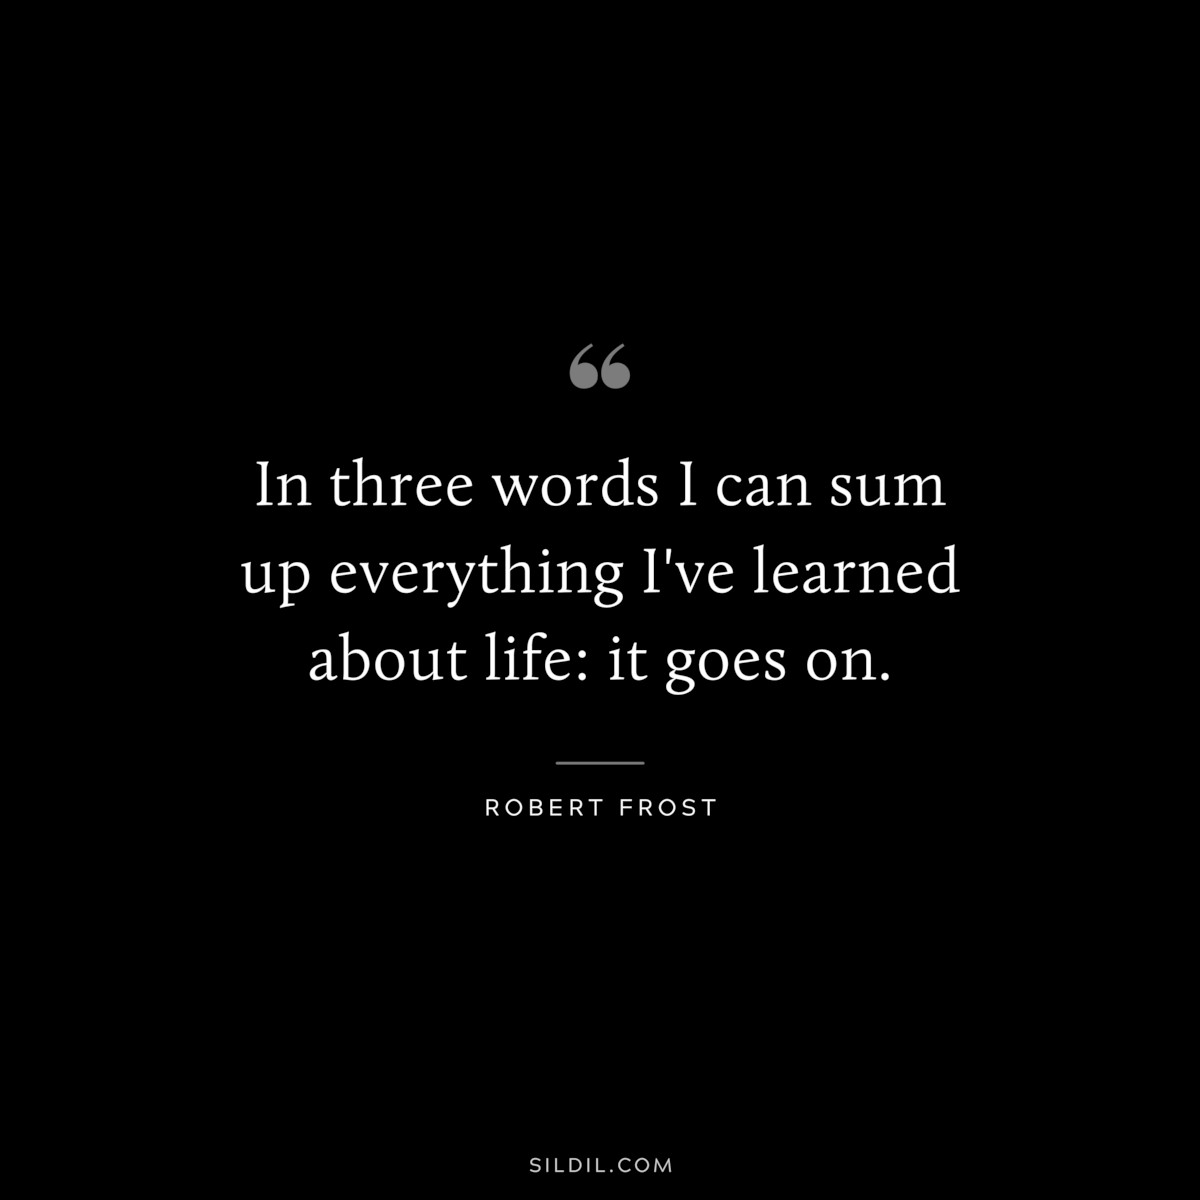 In three words I can sum up everything I've learned about life: it goes on. ― Robert Frost